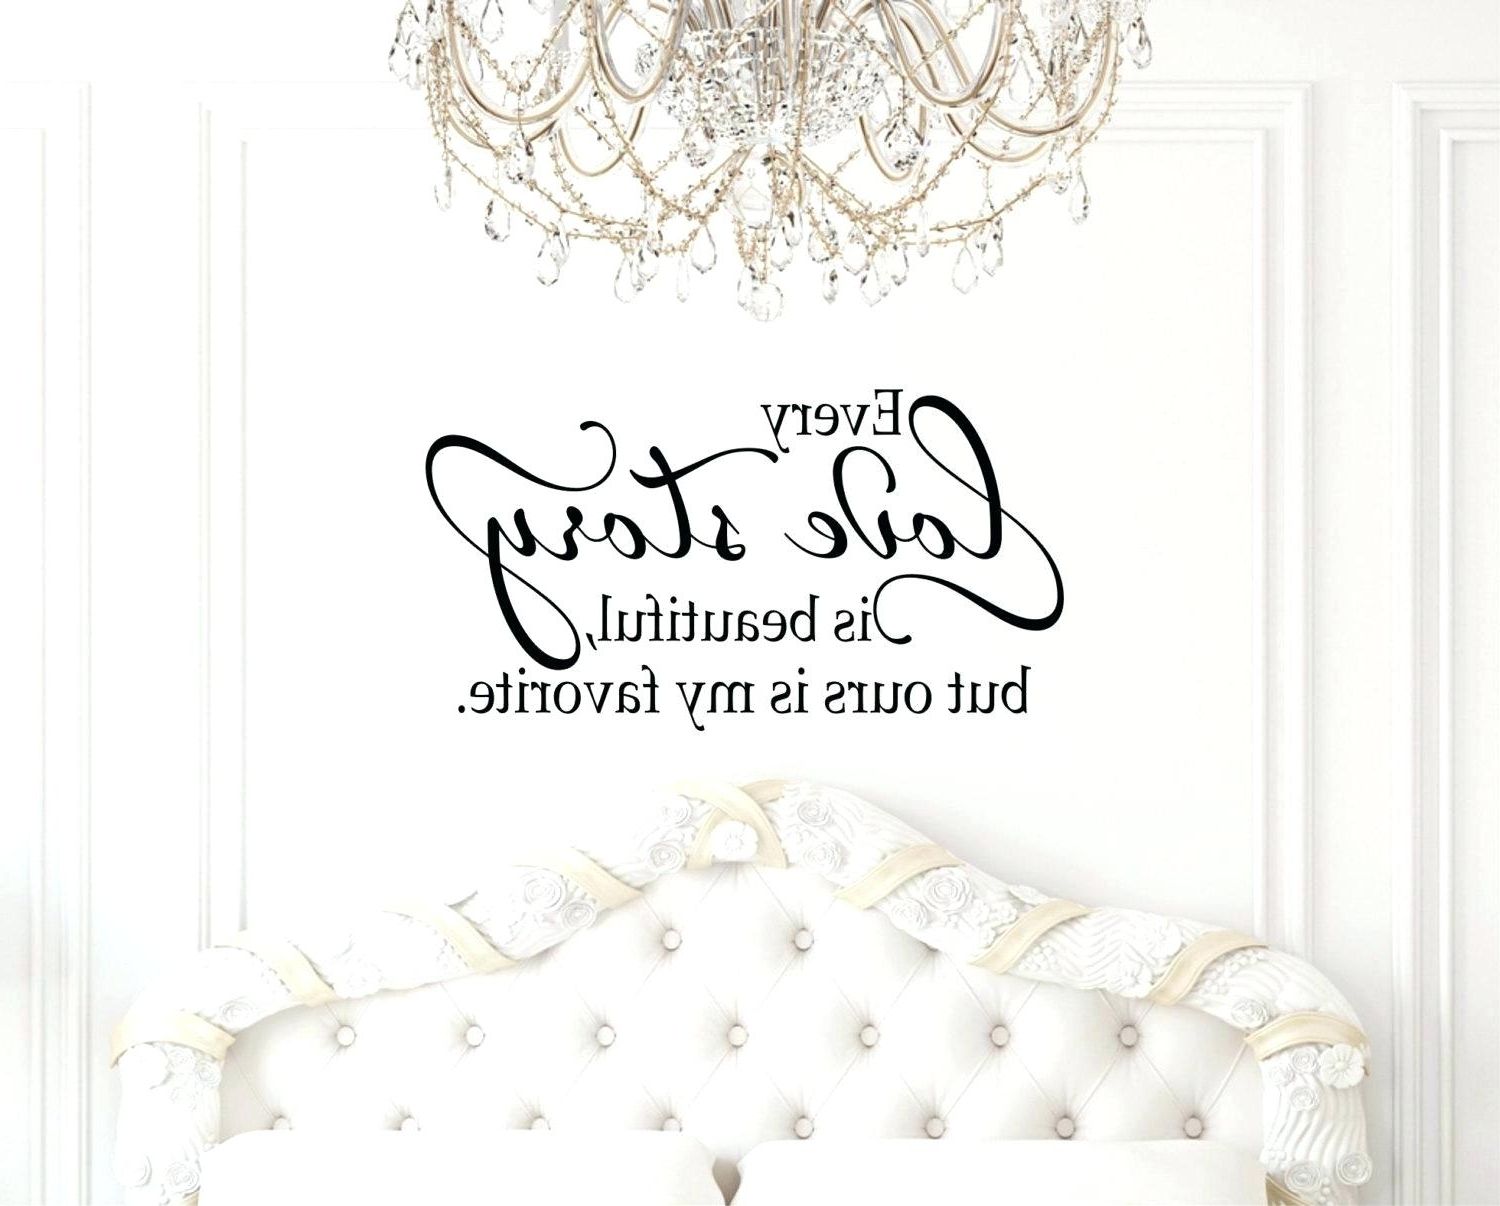 Fashionable Wall Decals Live Laugh Love Wall Ideas Love Wall Decor Love Wall Inside Live Laugh Love Wall Art Metal (View 13 of 15)